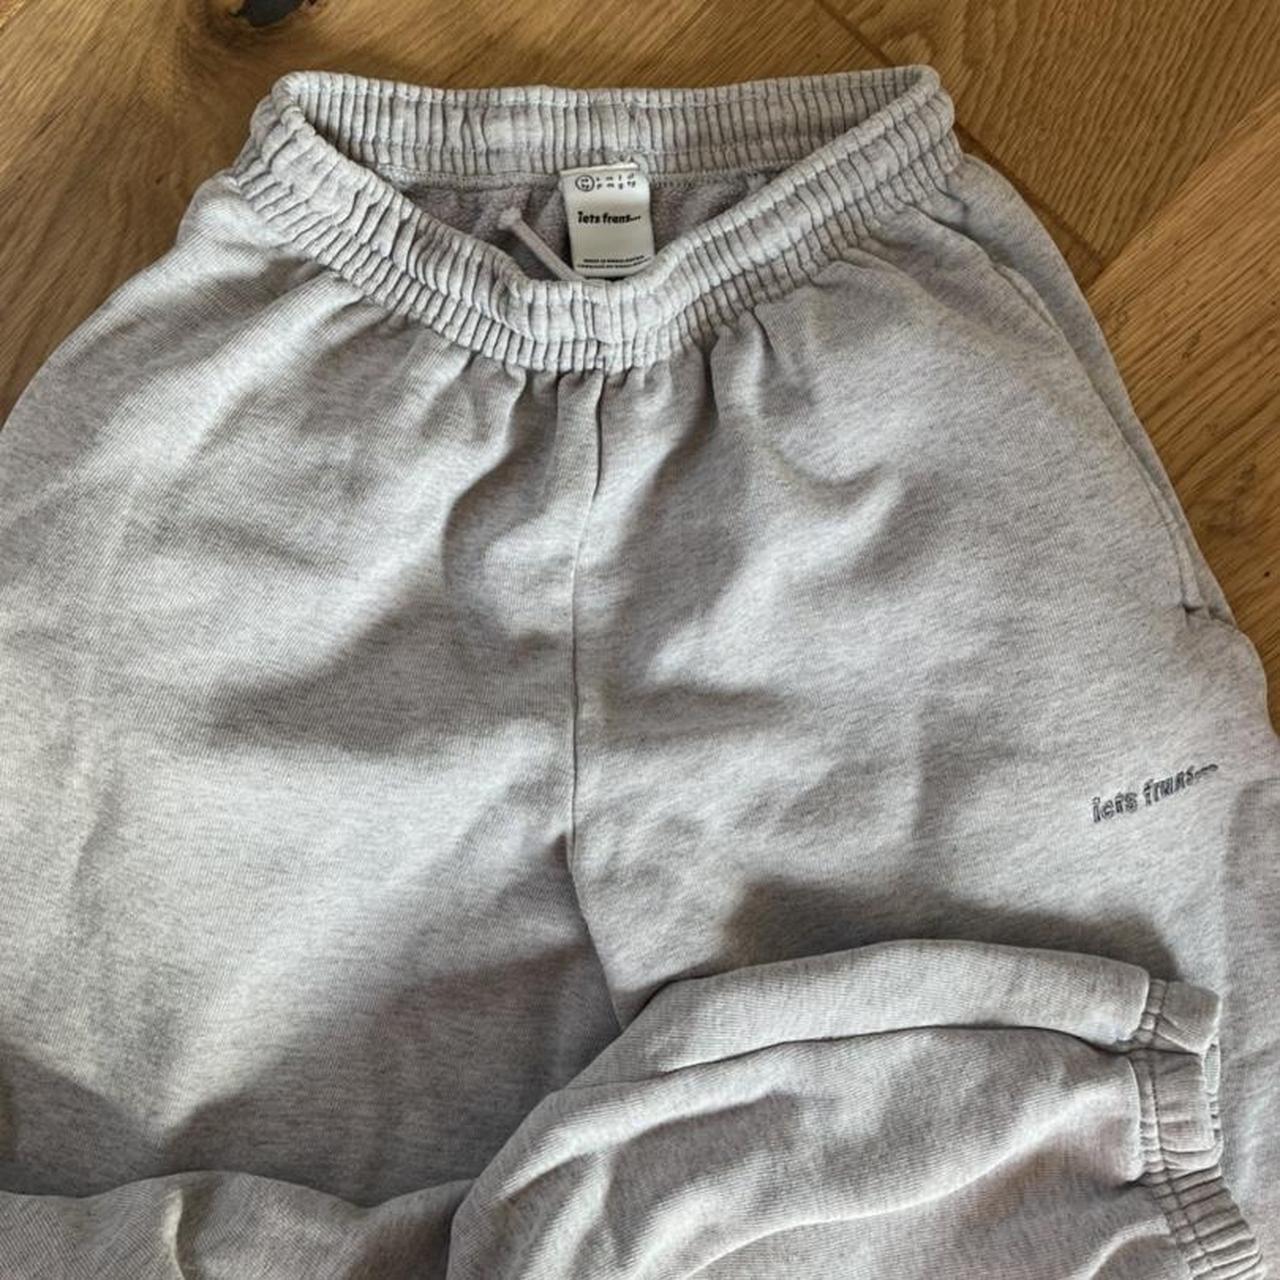 grey / lilac iets frans joggers. Very good condition... - Depop